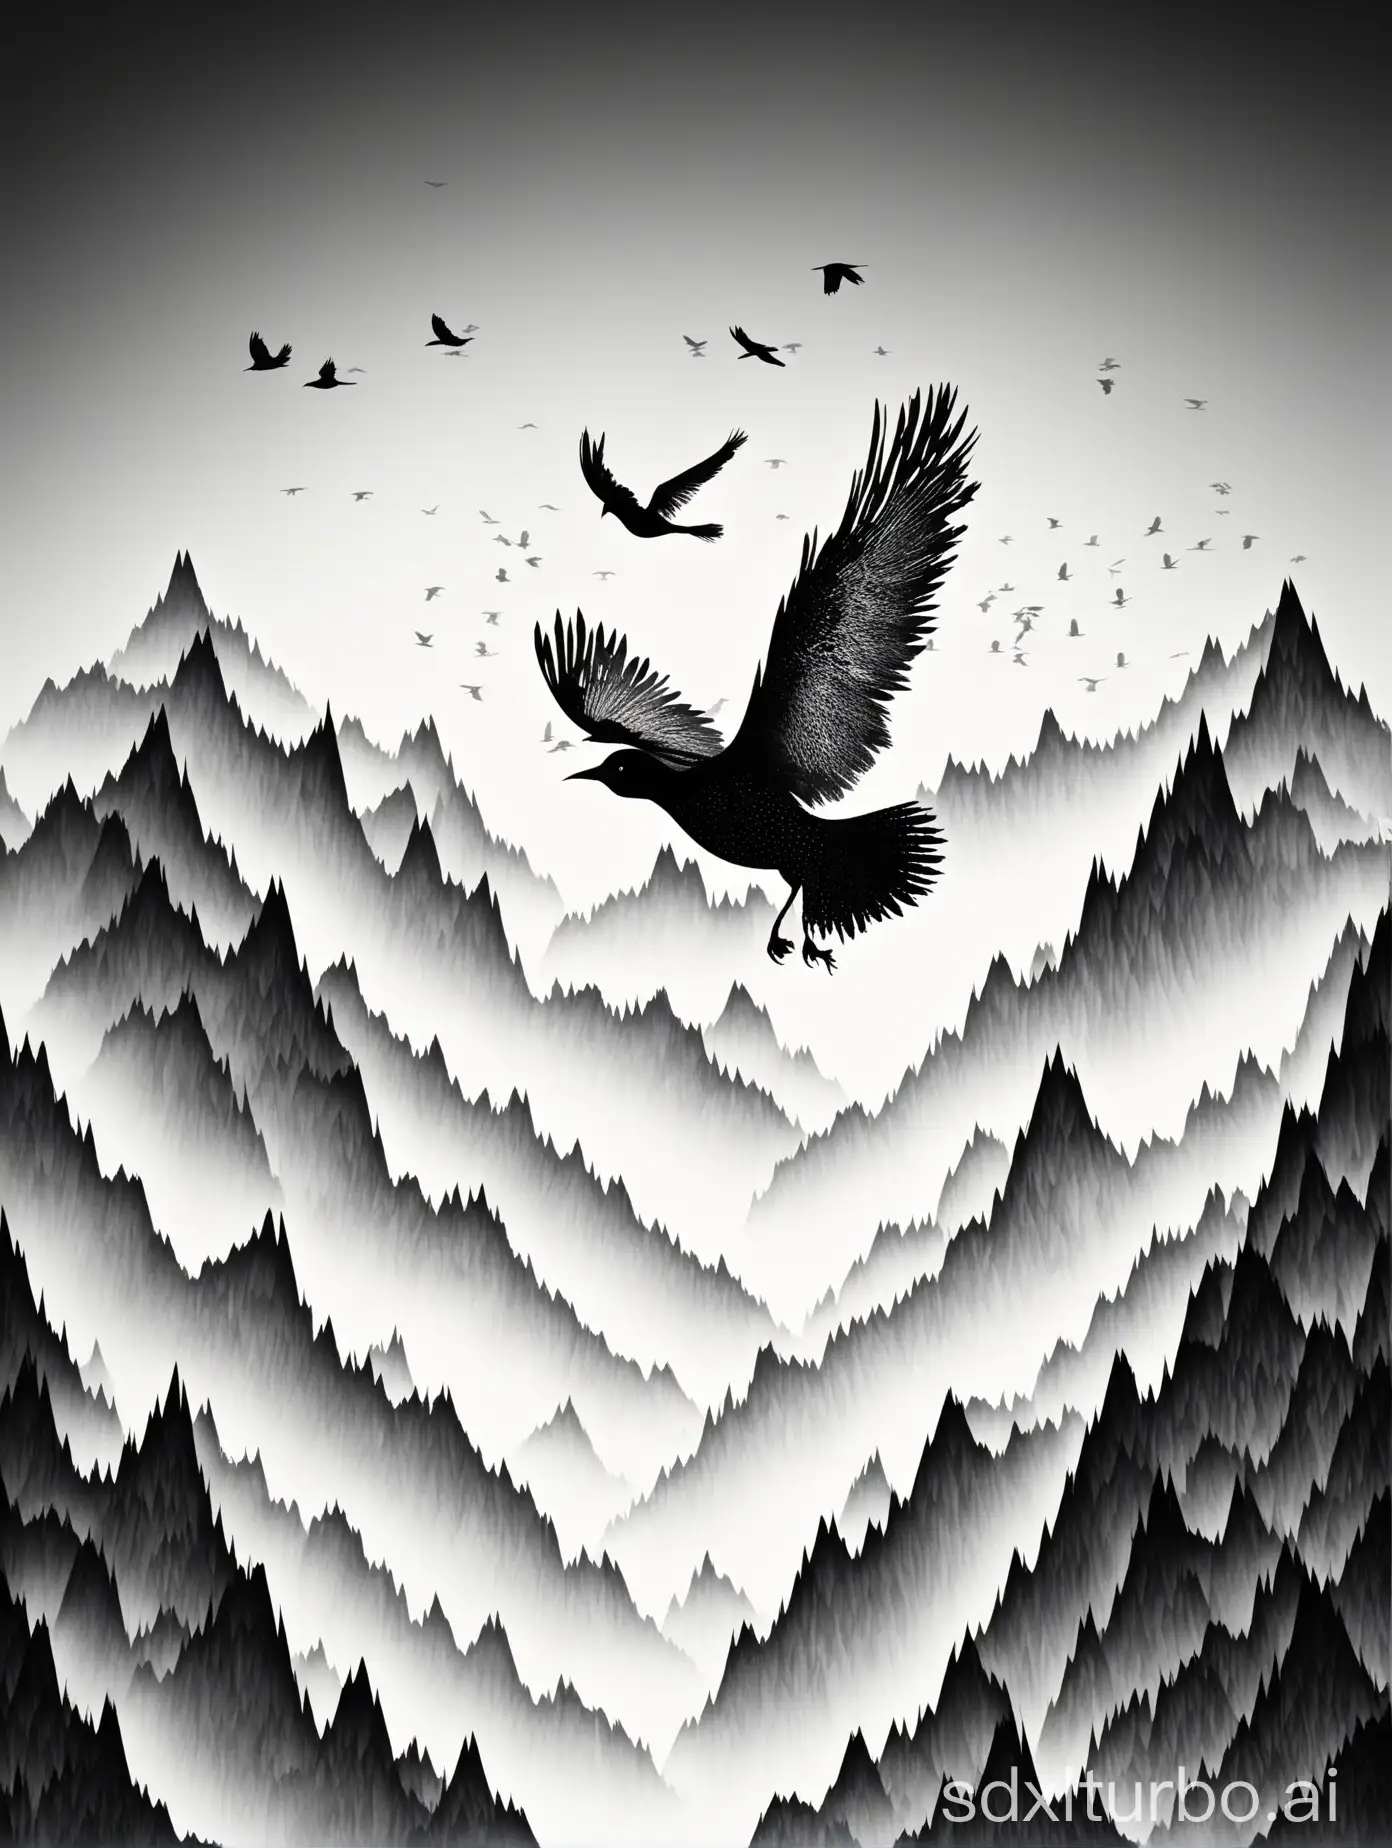 On a pure white background, countless tiny and delicate black dotted textures coalesce into a bird spreading its wings and flying high, with full plumage and graceful posture. At the same time, these dotted textures also ingeniously form a majestic mountain with overlapping peaks, towering and magnificent. Between the bird and the mountain, light and shadow intermingle, creating a dreamy and three-dimensional visual effect. The bird seems to be chasing the contours of the mountain, and the entire image is filled with a sense of motion and harmony. 